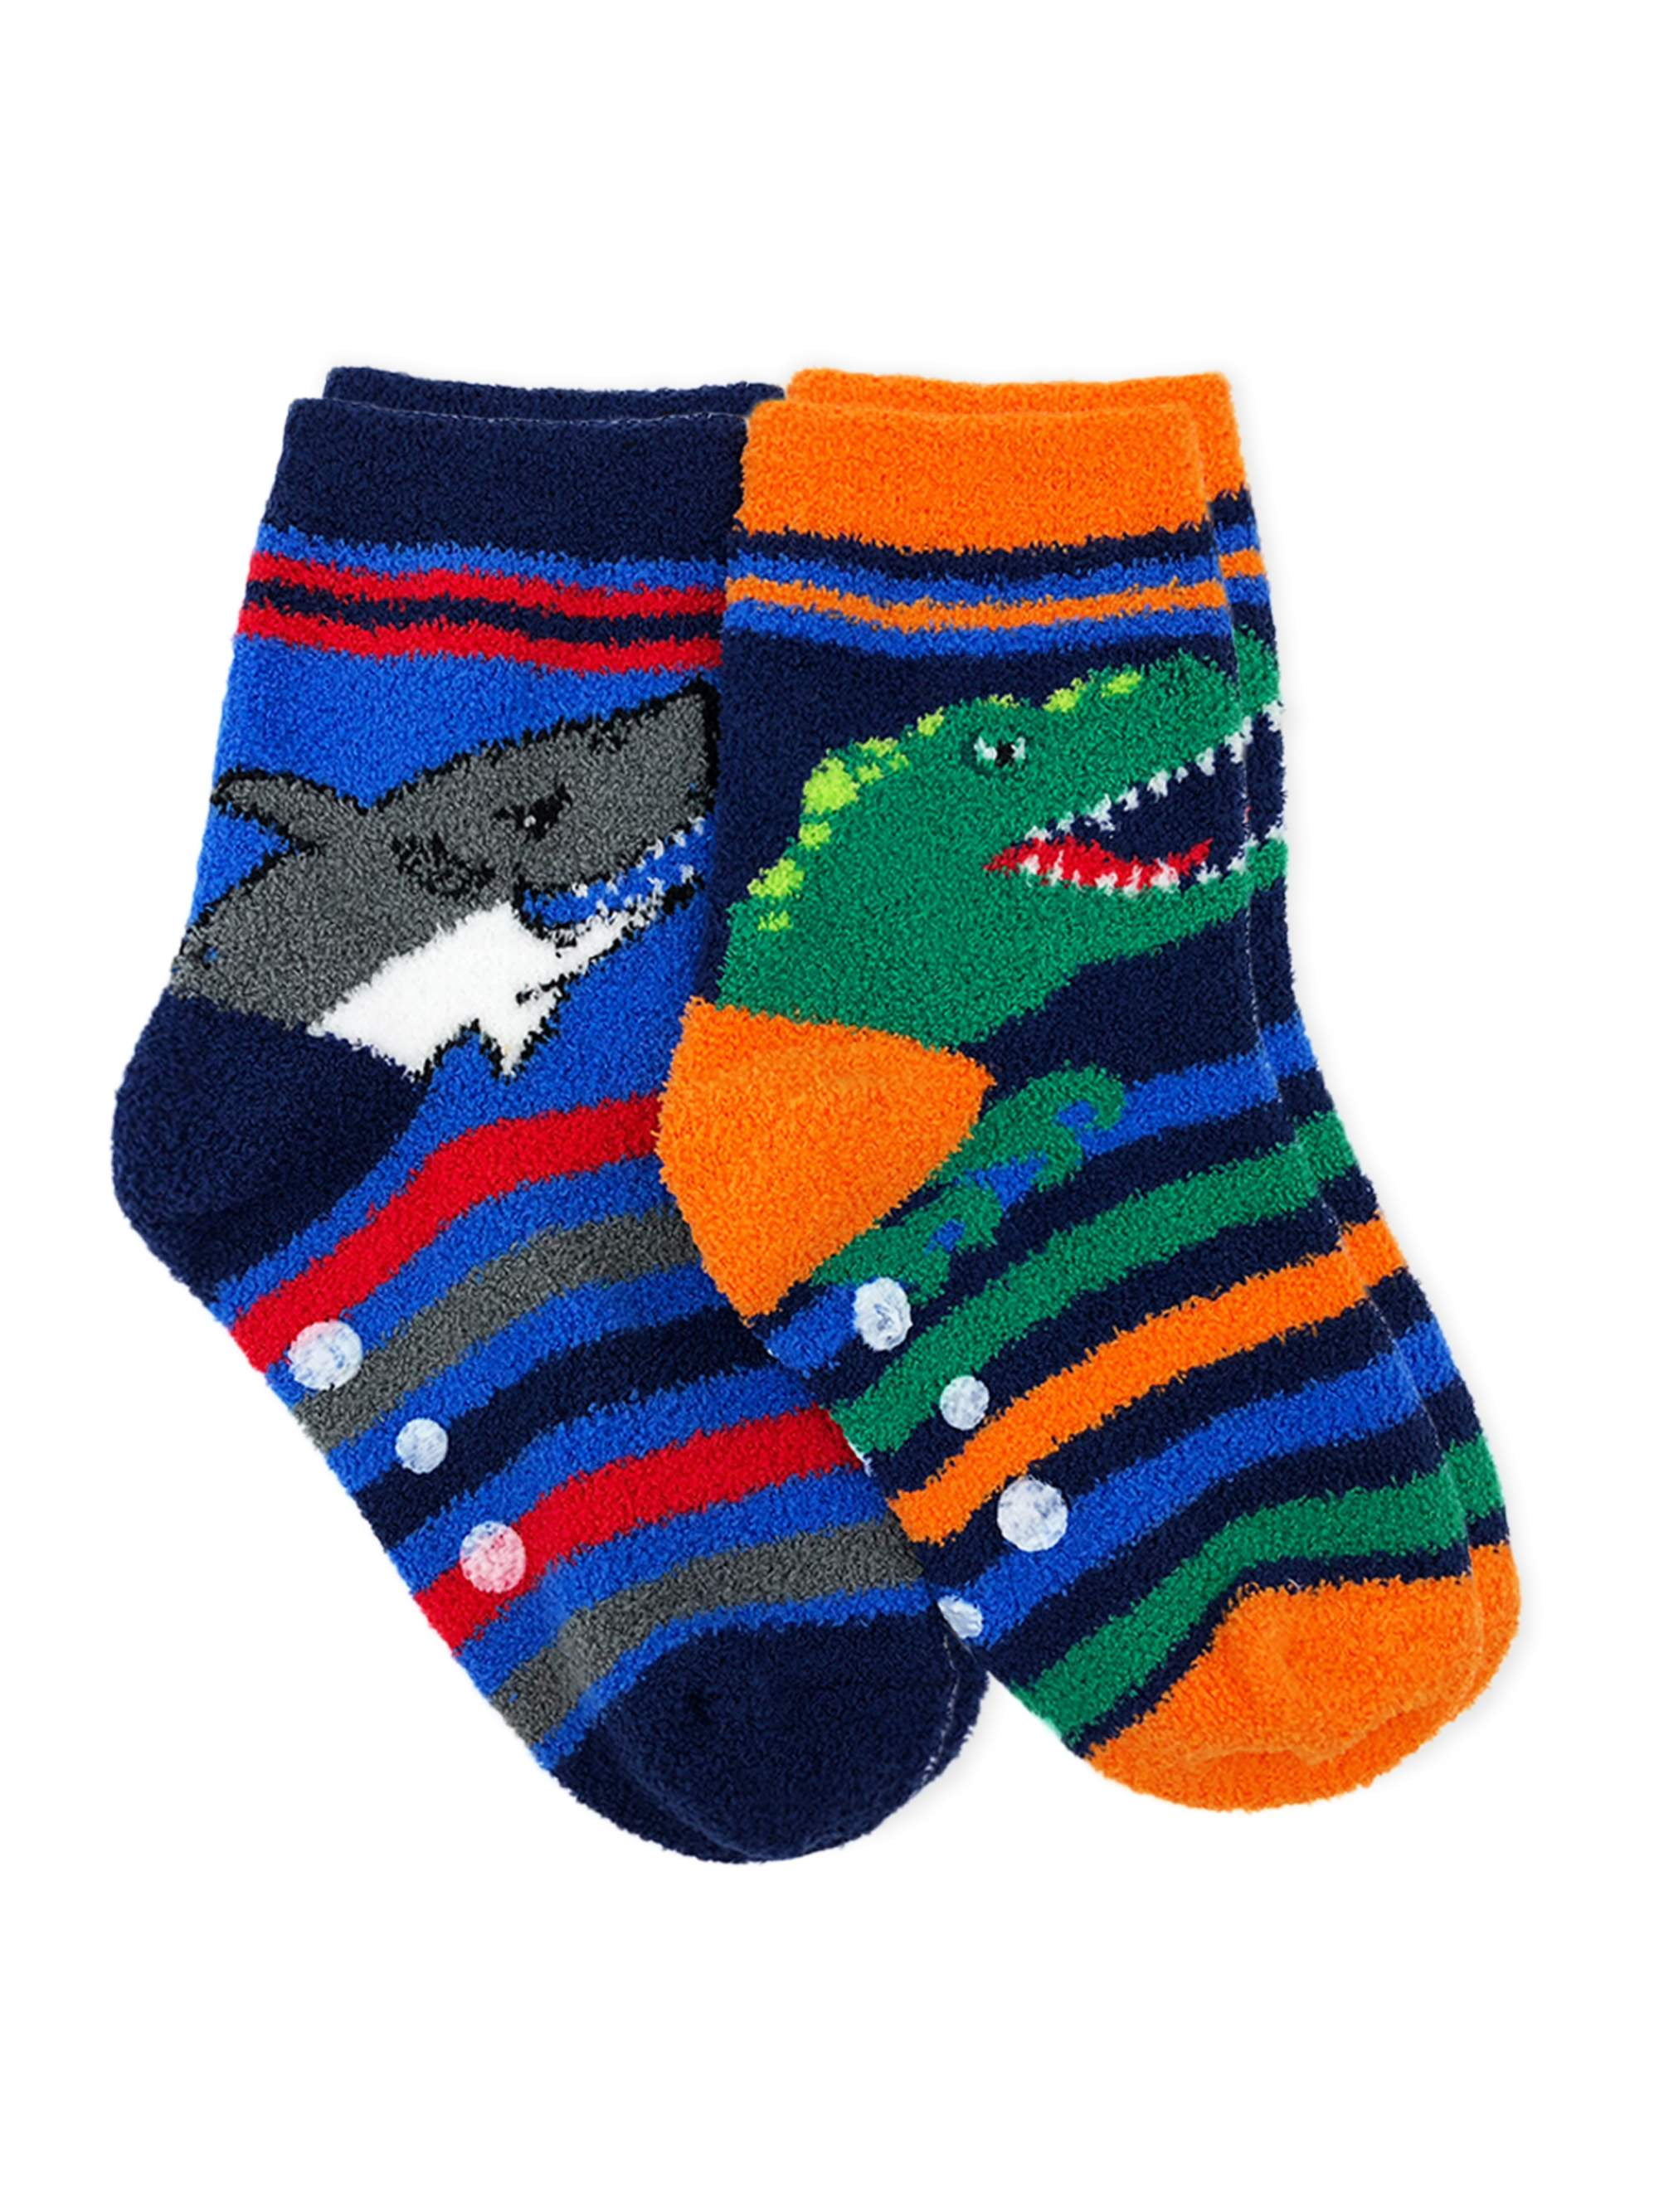 InterestPrint Dolphin Sea Turtle Seahorse Kids Crew Socks Athletic Casual Warm Socks for Boys and Girls 